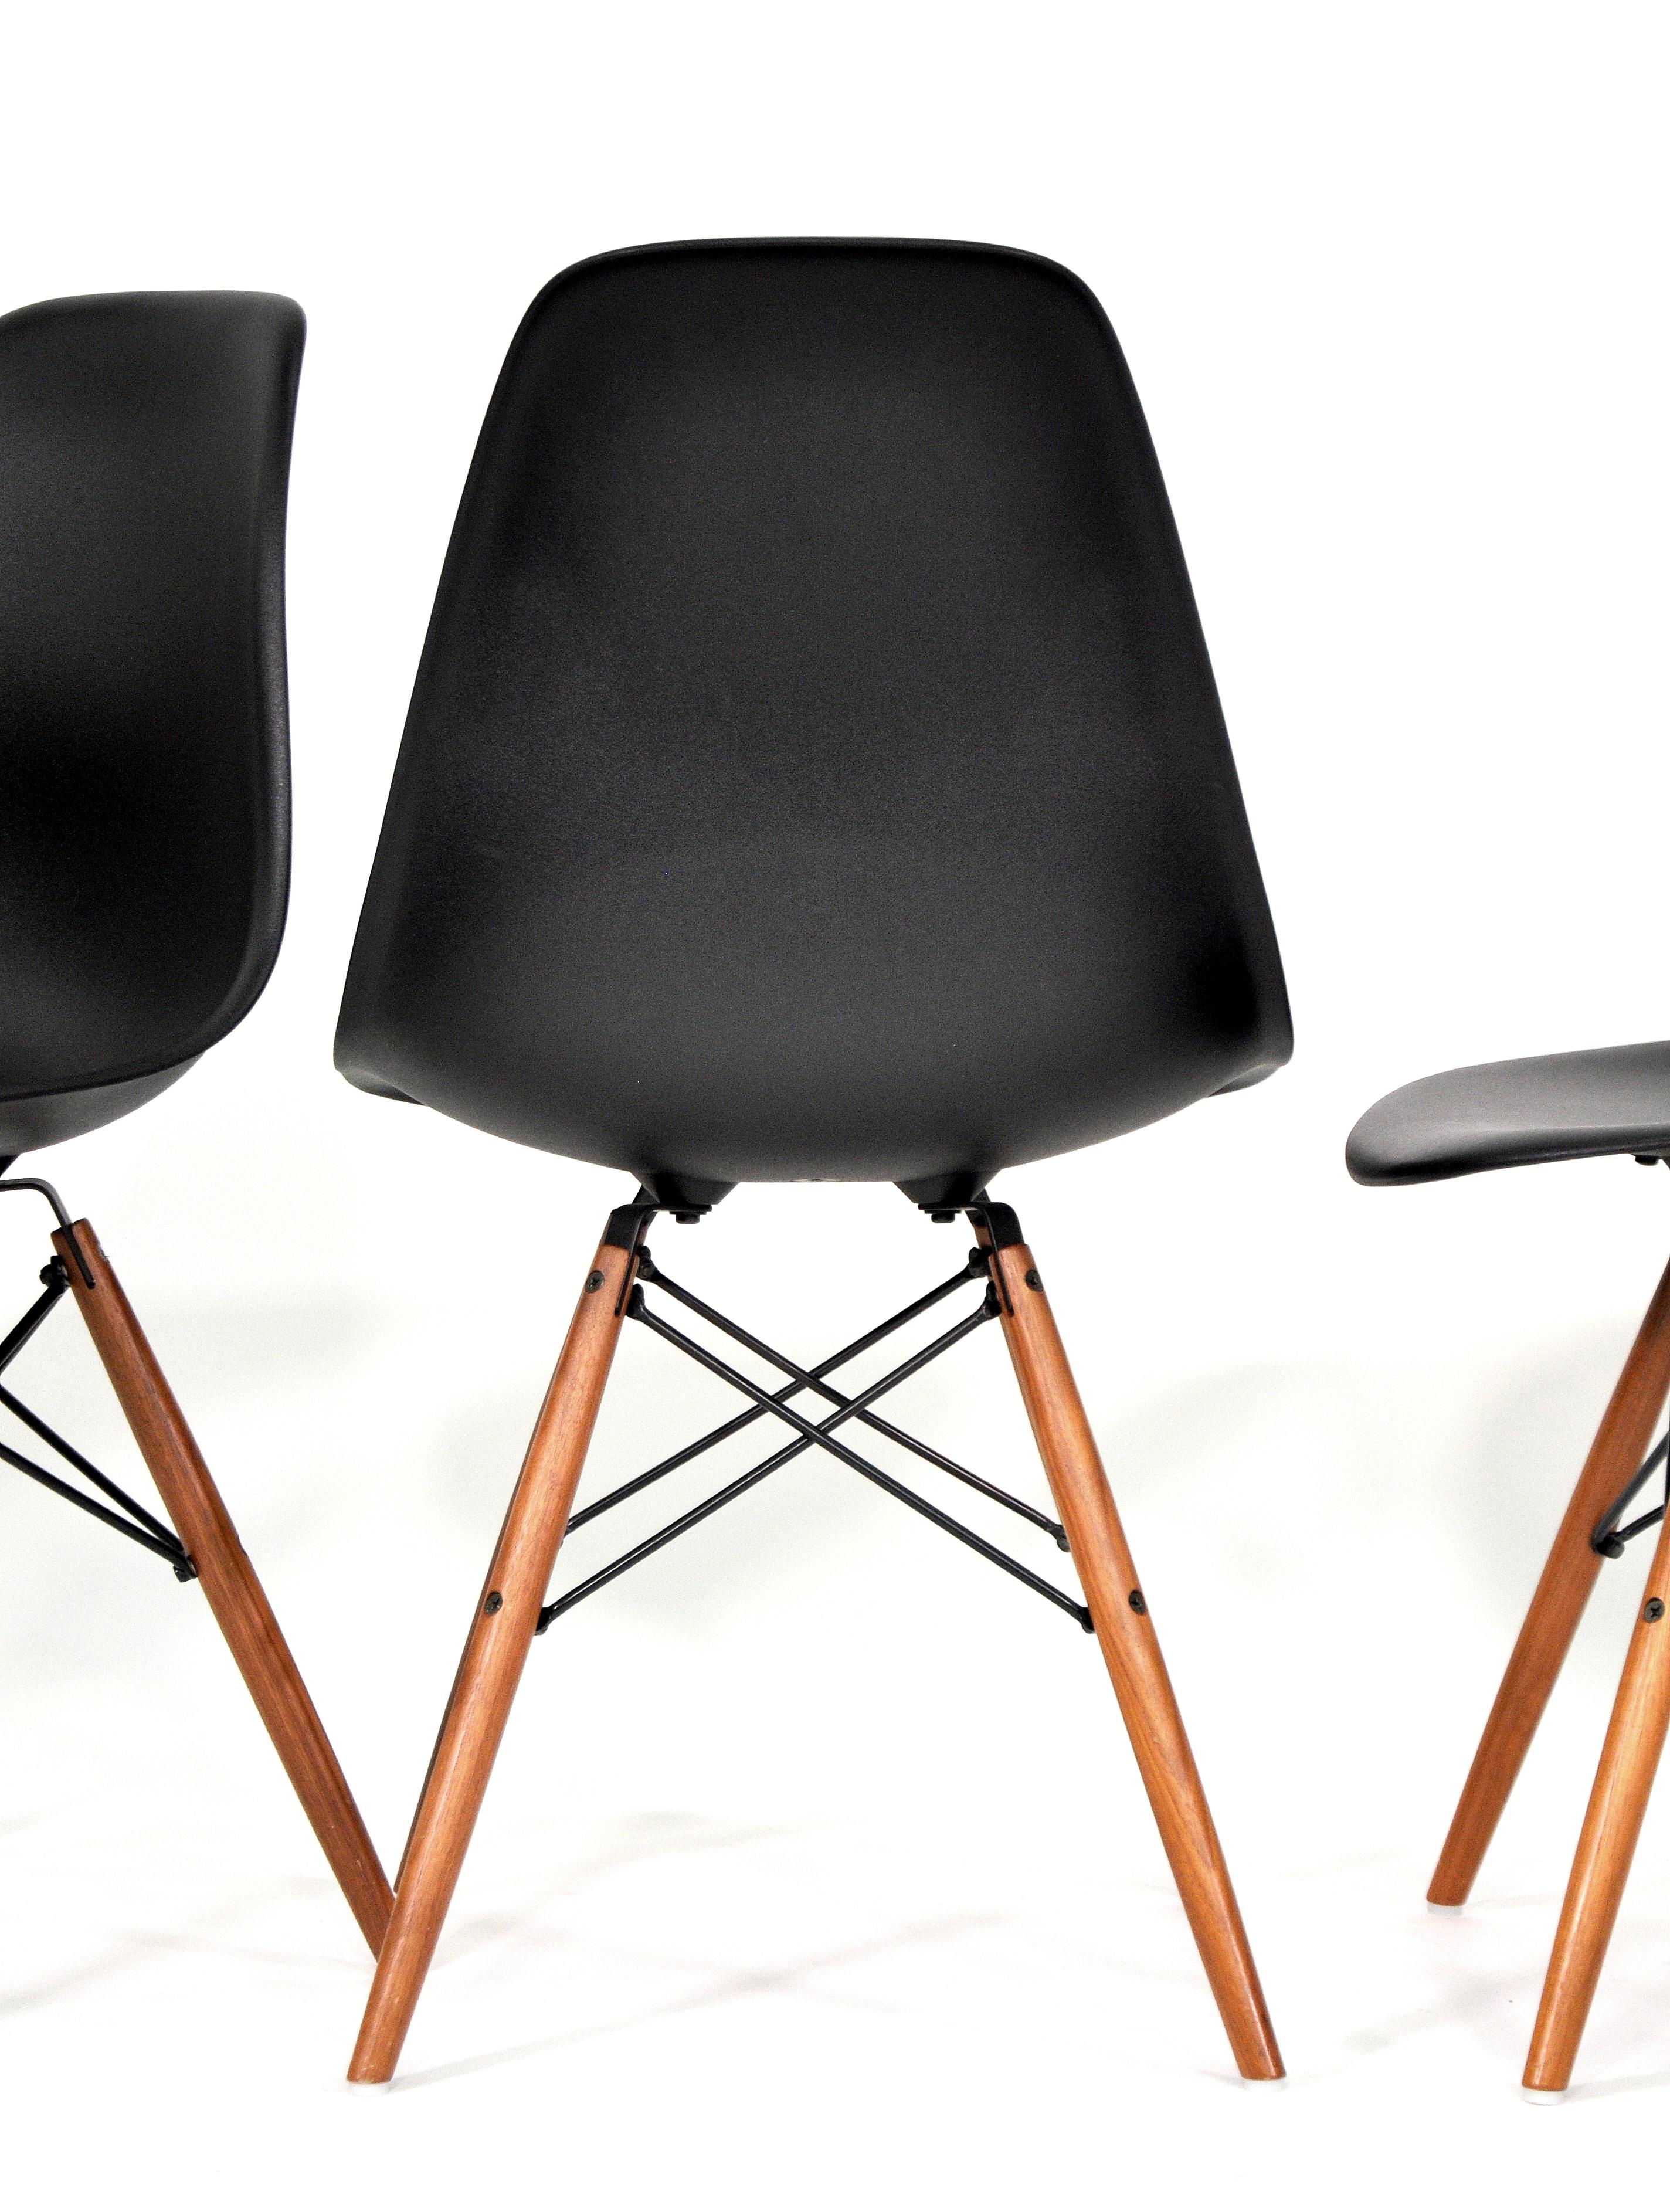 Four Eames Herman Miller Black DSW Dining Chairs For Sale 2